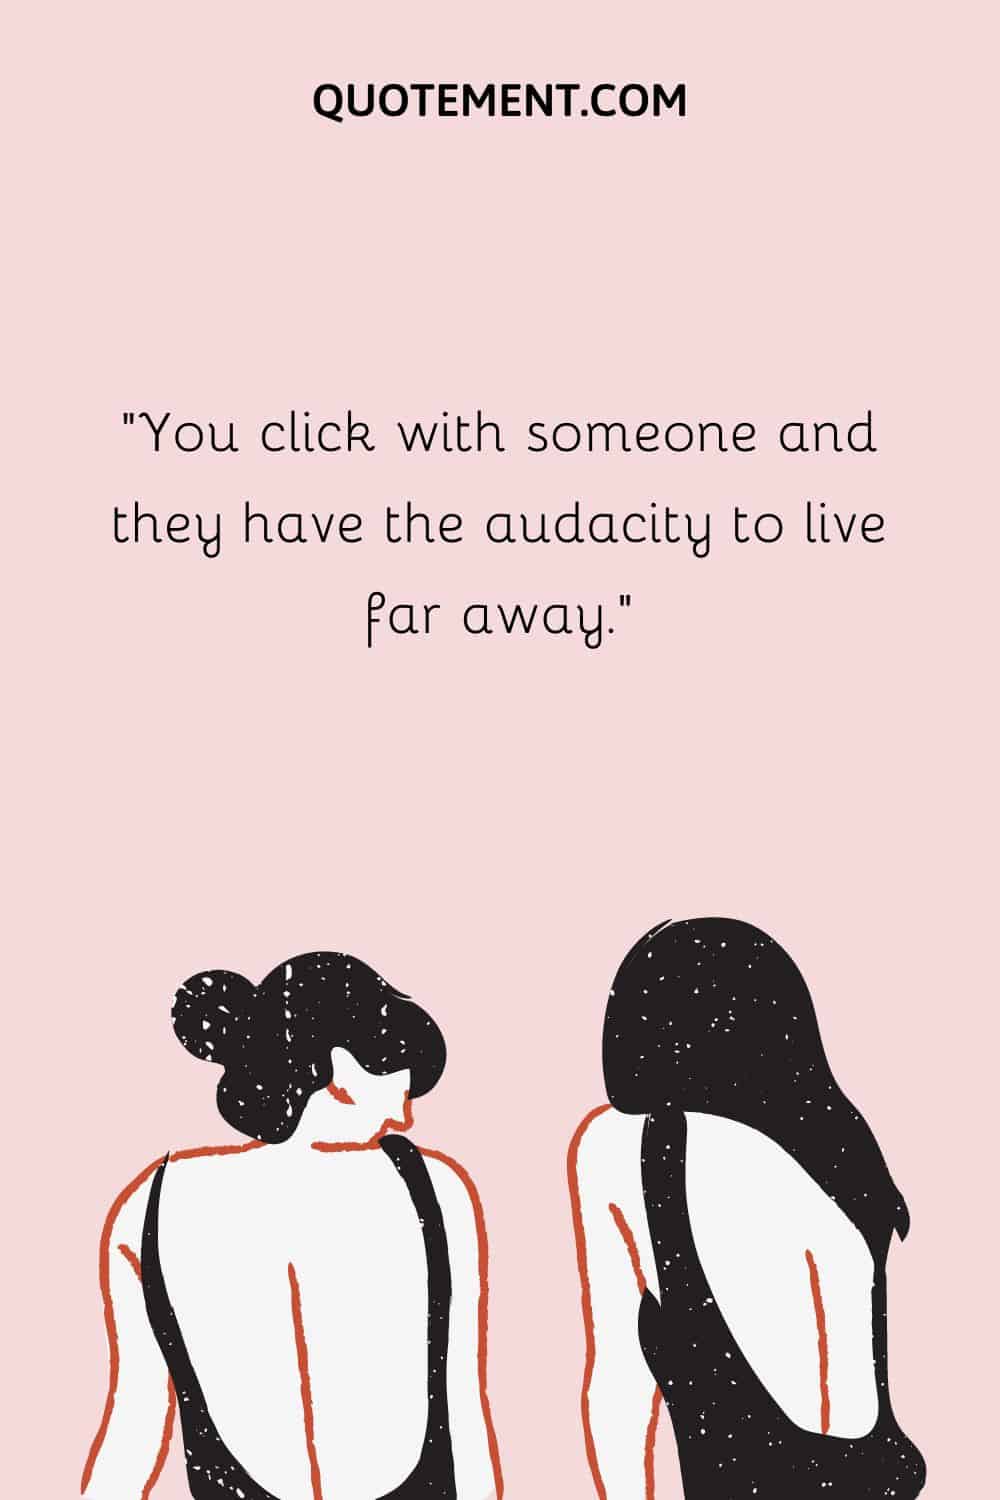 You click with someone and they have the audacity to live far away